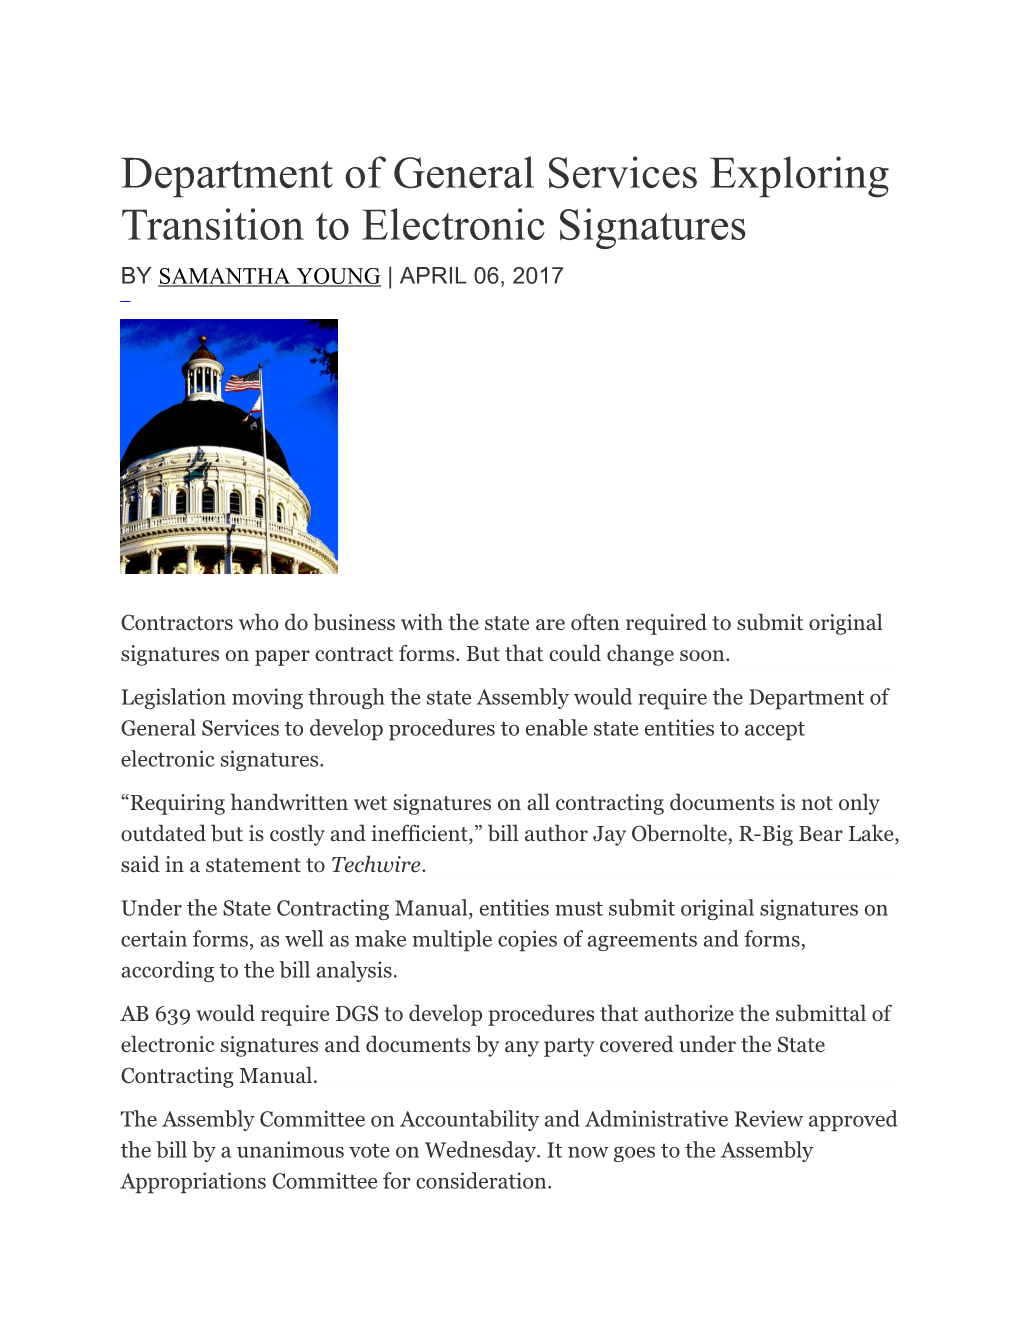 Department of General Services Exploring Transition to Electronic Signatures